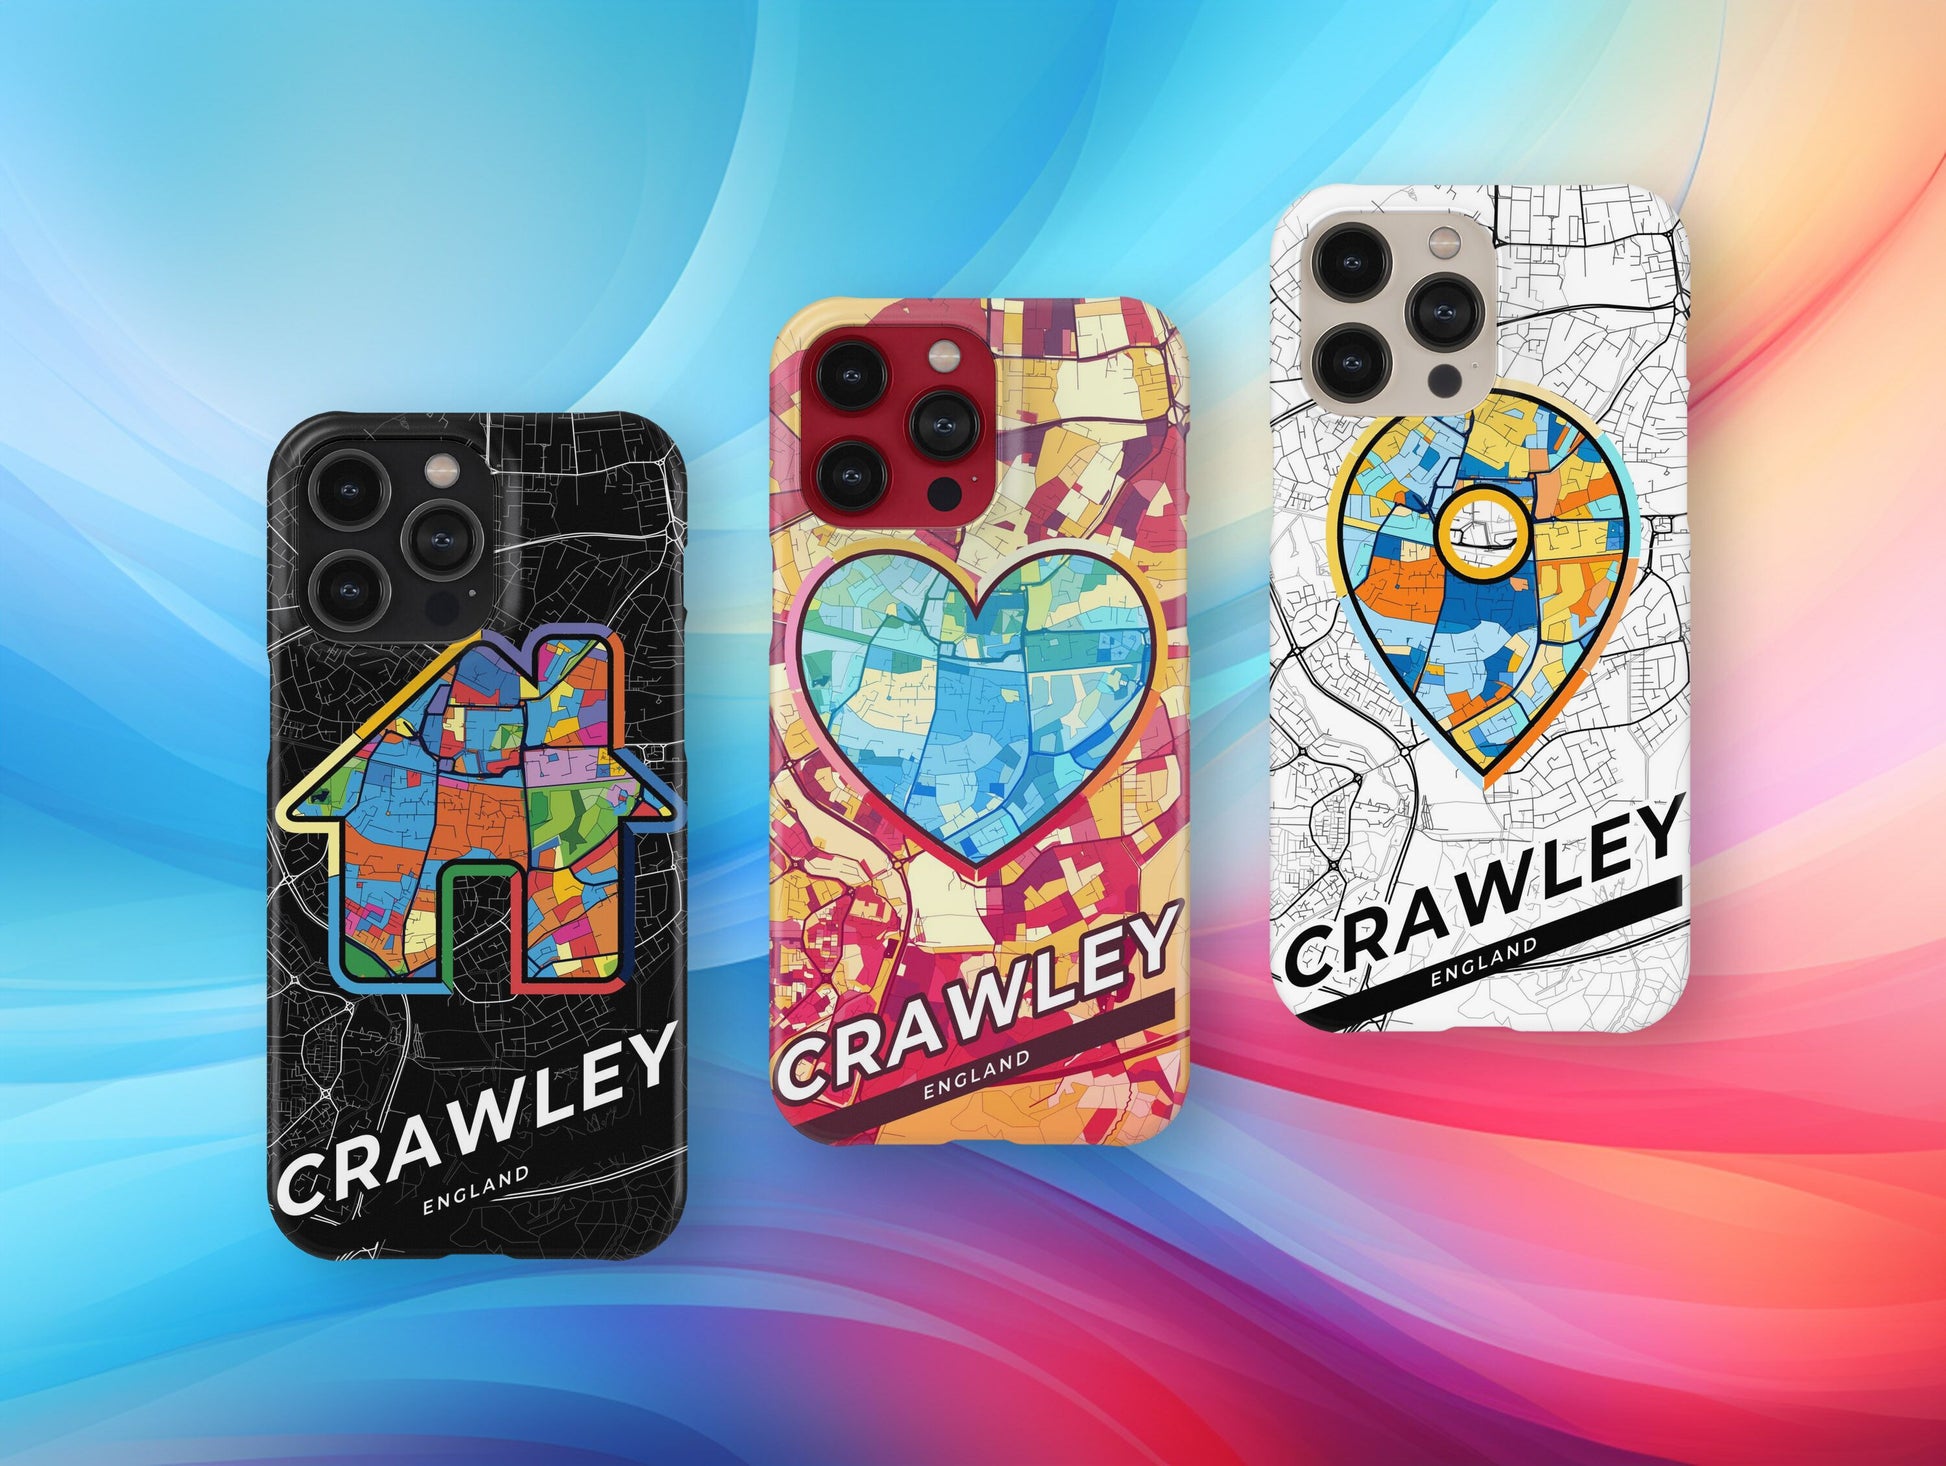 Crawley England slim phone case with colorful icon. Birthday, wedding or housewarming gift. Couple match cases.